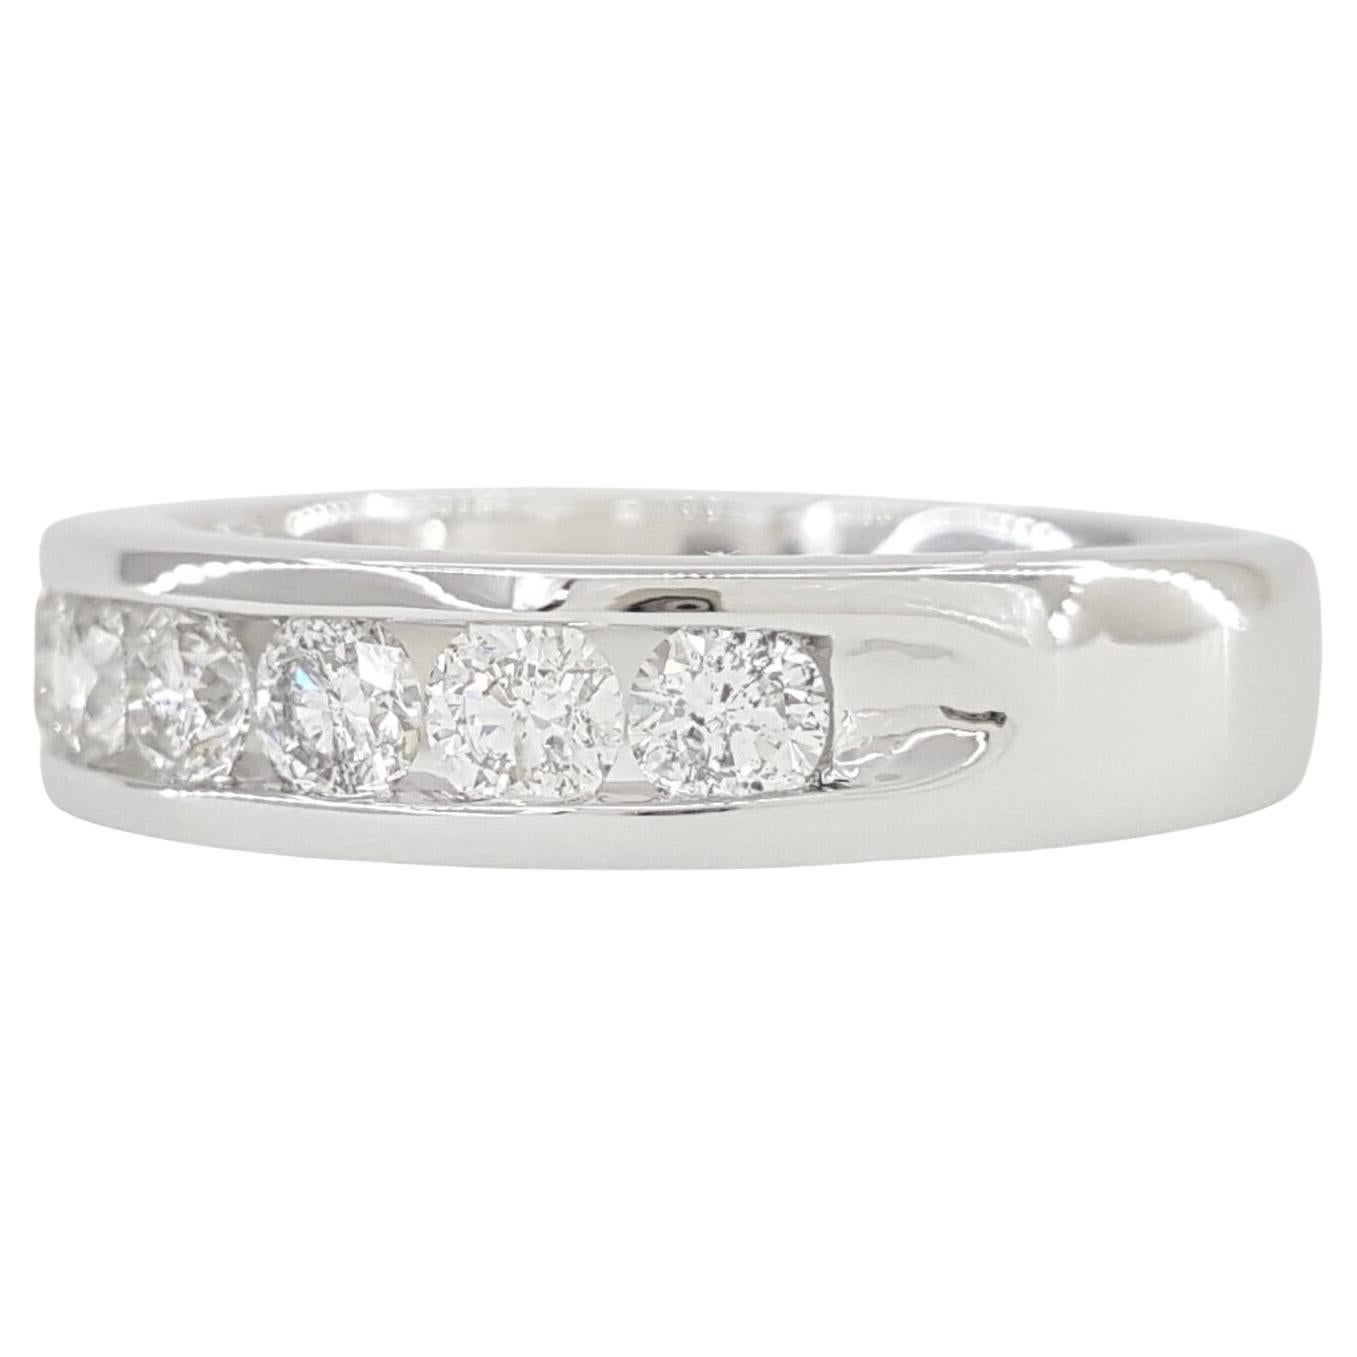 A stunning 14K White Gold Round Brilliant Cut Diamond Channel Set Wedding/Anniversary Band/Ring is on offer. Weighing 5.3 grams and sized at 7, the ring boasts a width of 4.9 mm. The design is adorned with 9 Natural Round Brilliant Cut diamonds,